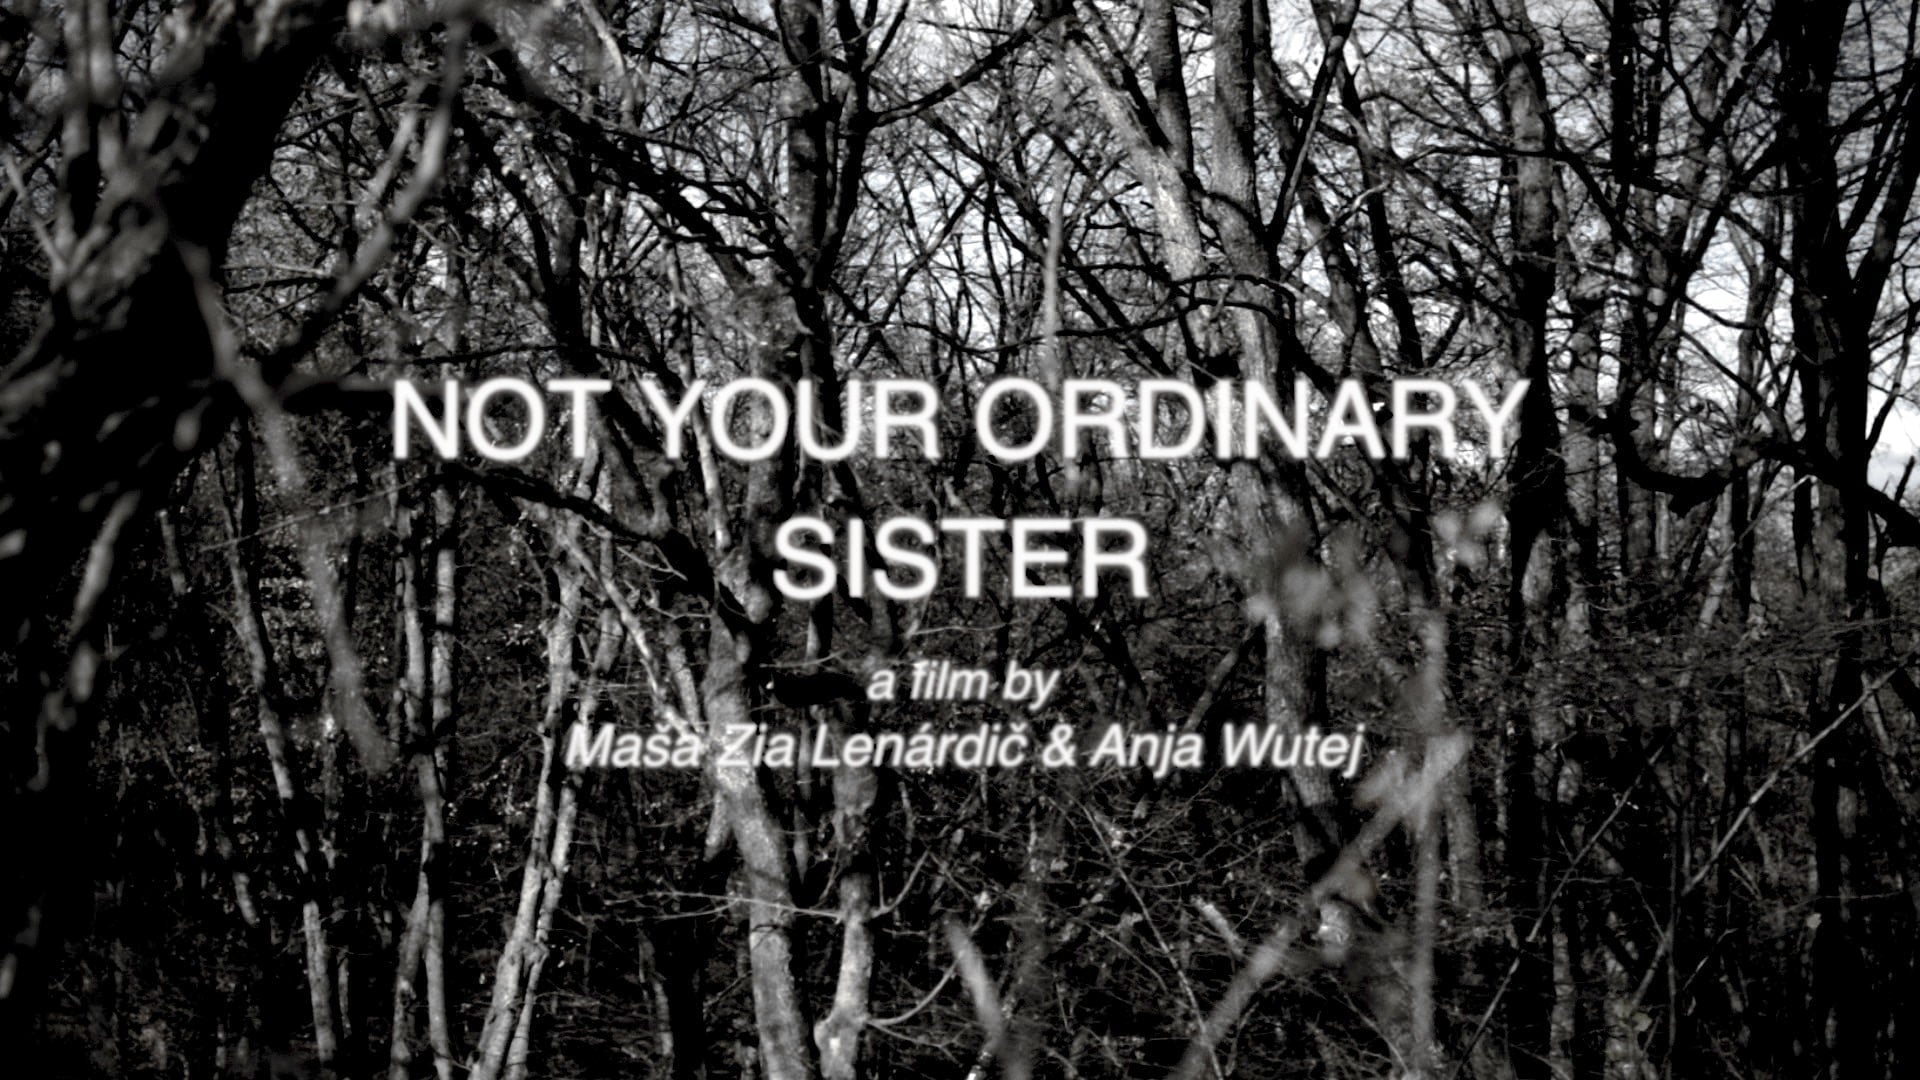 Not Your Ordinary Sister (Trailer)